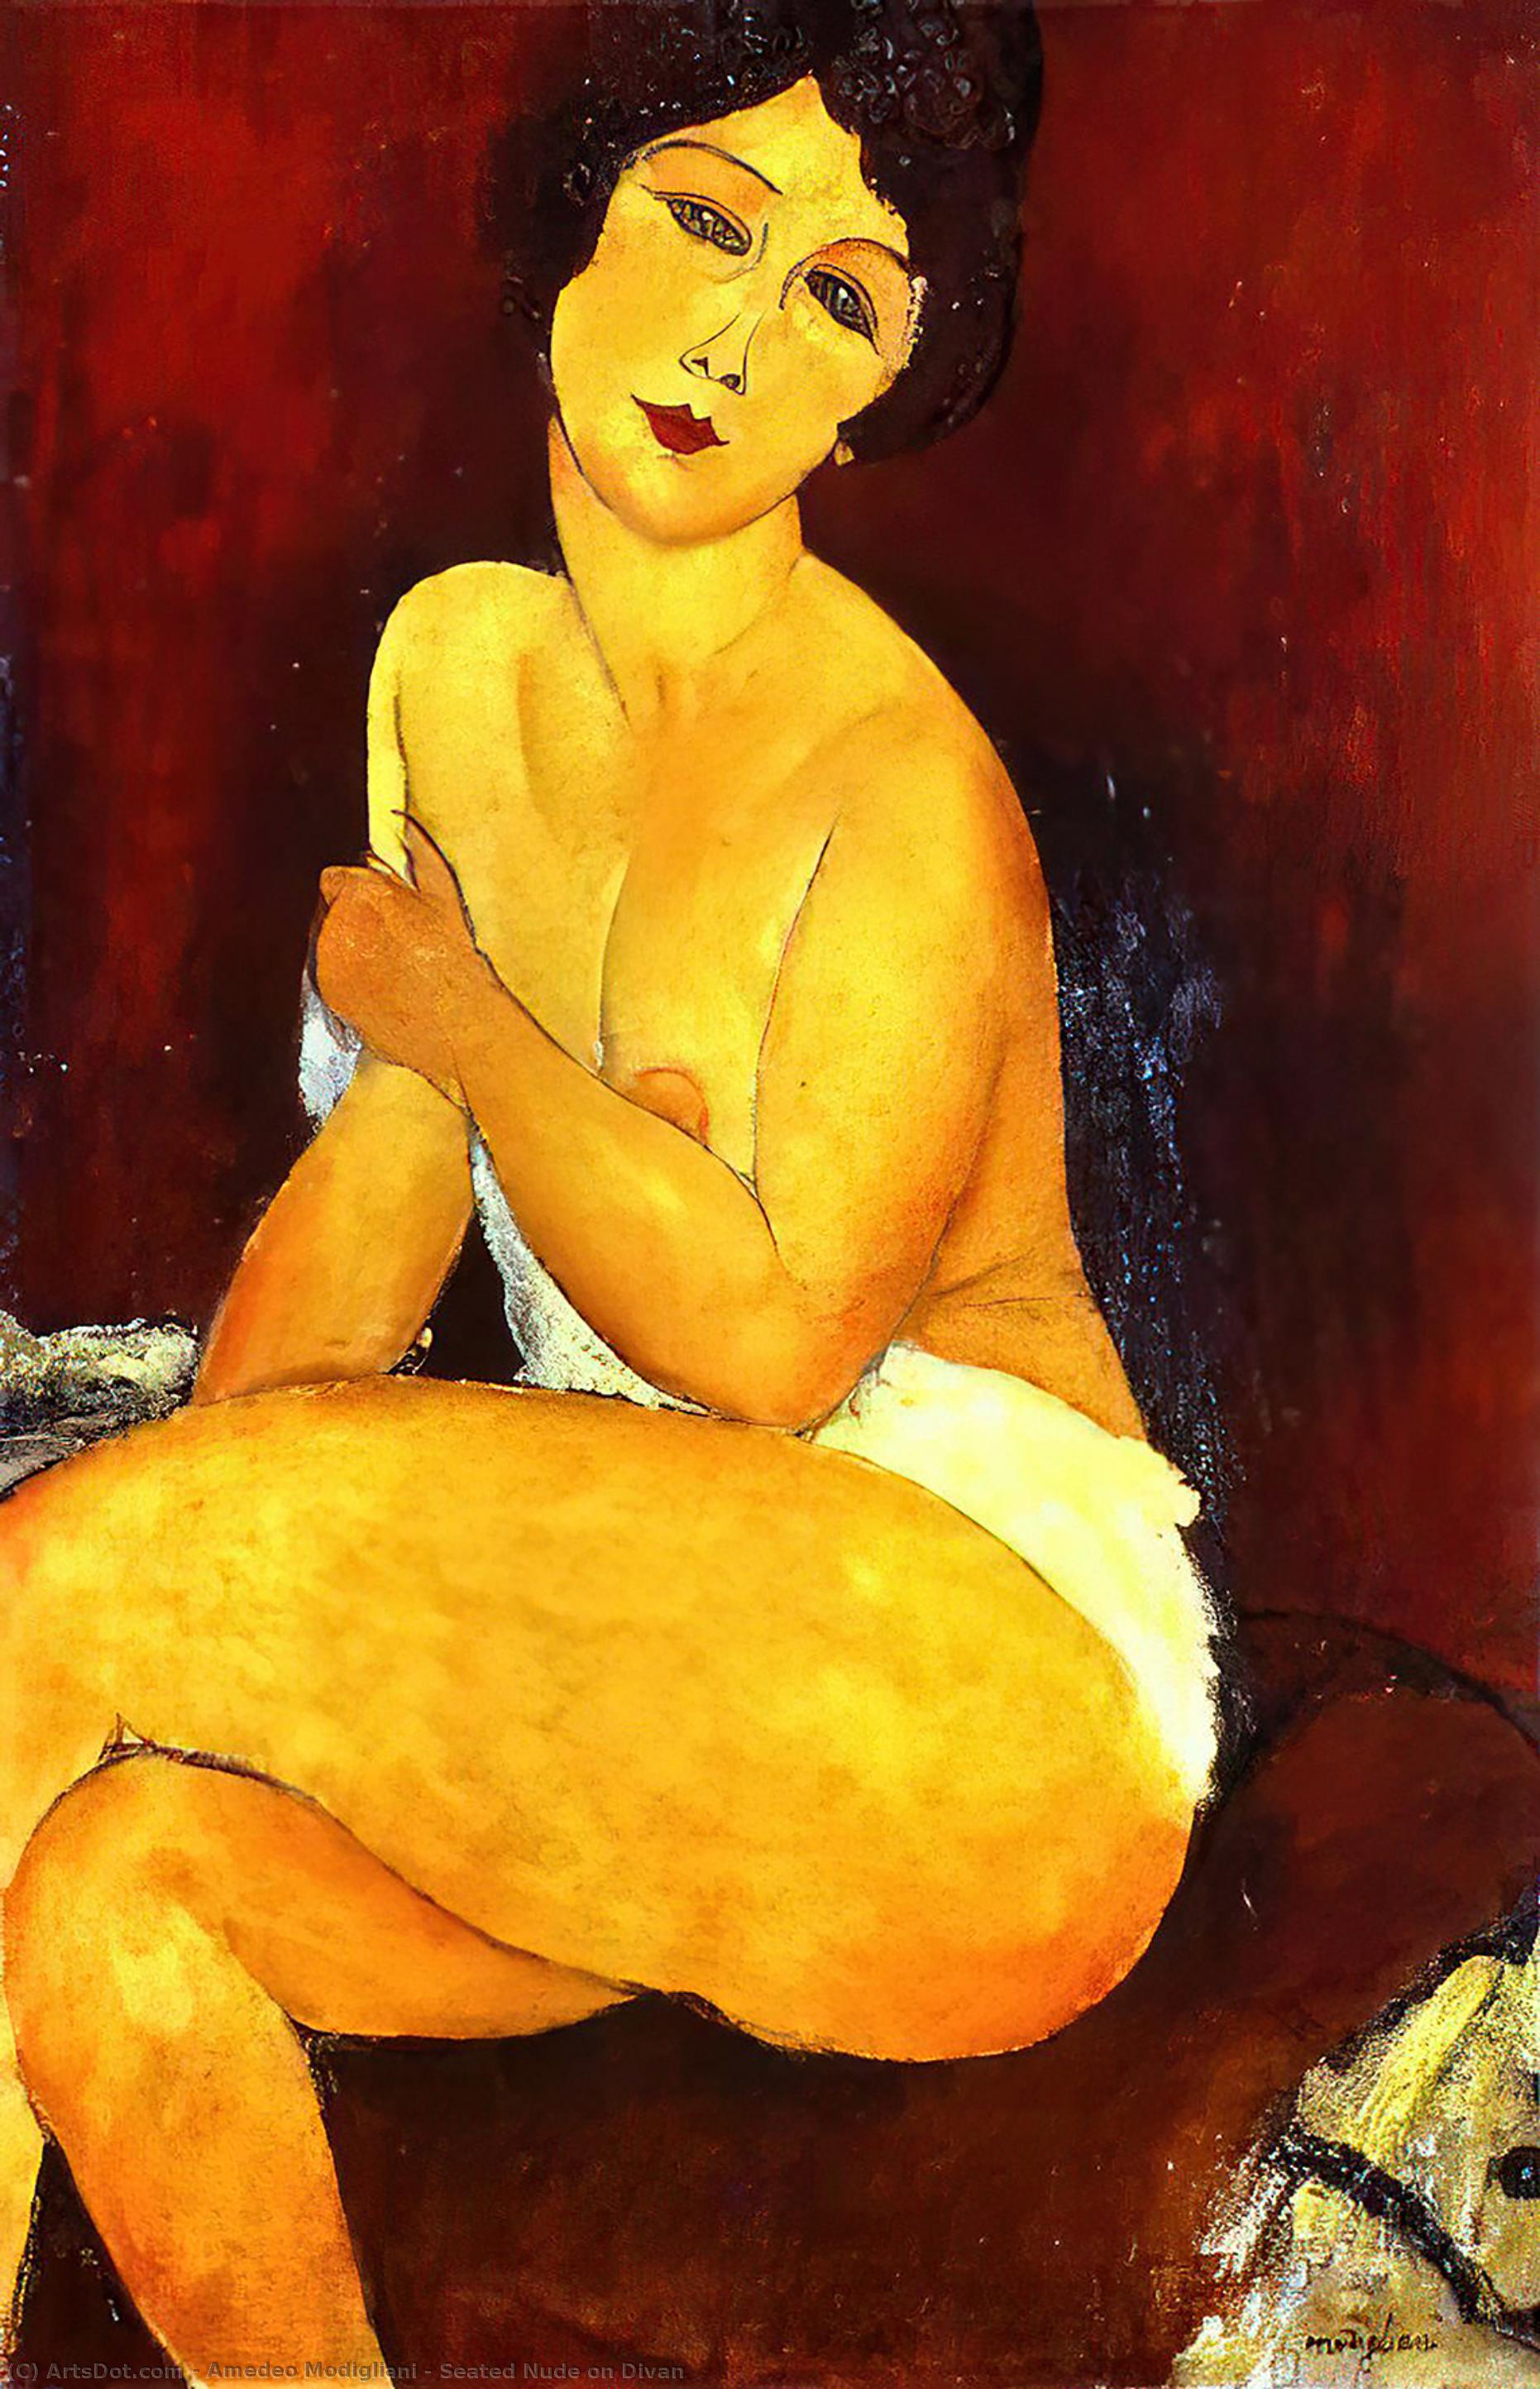 Order Paintings Reproductions Seated Nude on Divan by Amedeo Clemente Modigliani (1884-1920, Italy) | ArtsDot.com